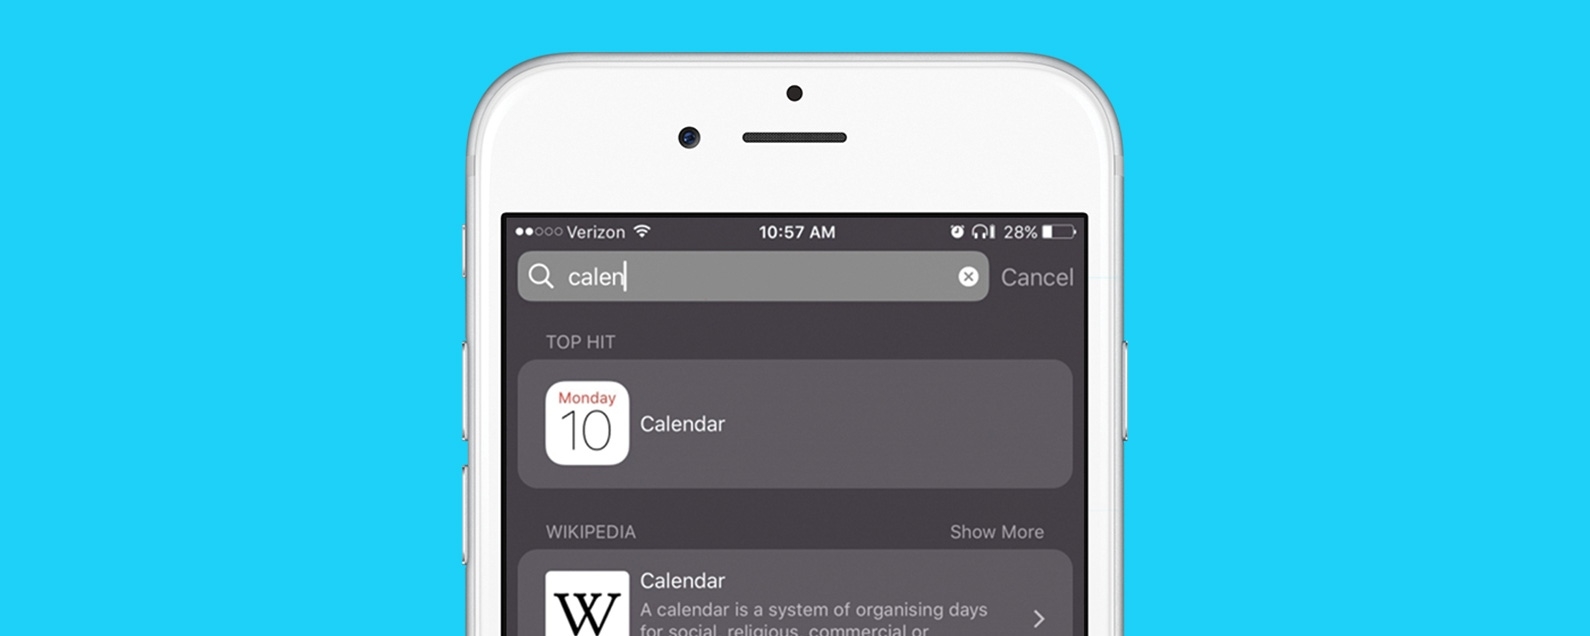 Iphone Calendar Disappeared? How To Get It Back On Iphone Calendar Icon Disappeared Iphone